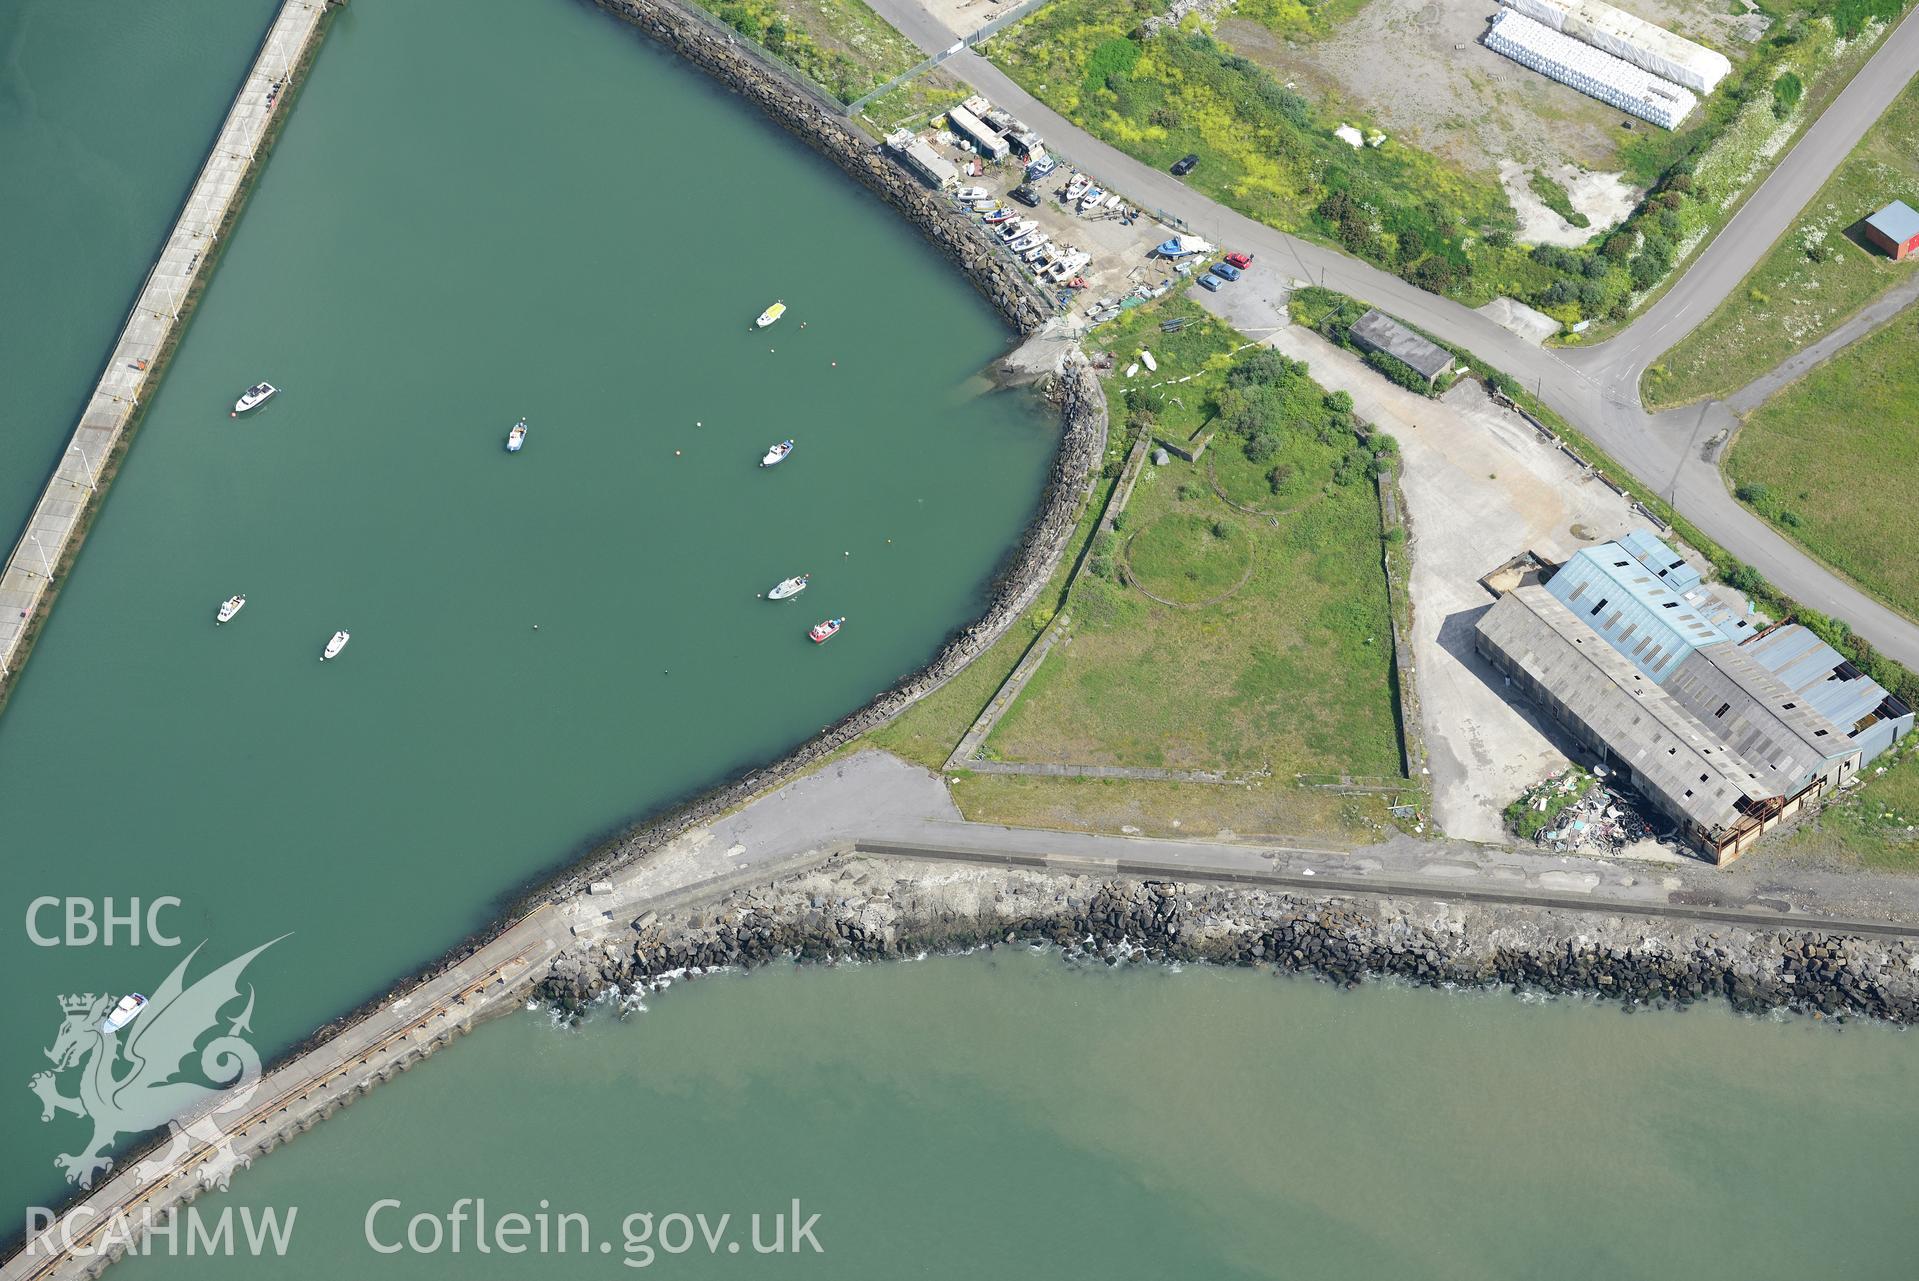 Repair workshop at the Prince of Wales dry dock, Swansea. Oblique aerial photograph taken during the Royal Commission's programme of archaeological aerial reconnaissance by Toby Driver on 19th June 2015.